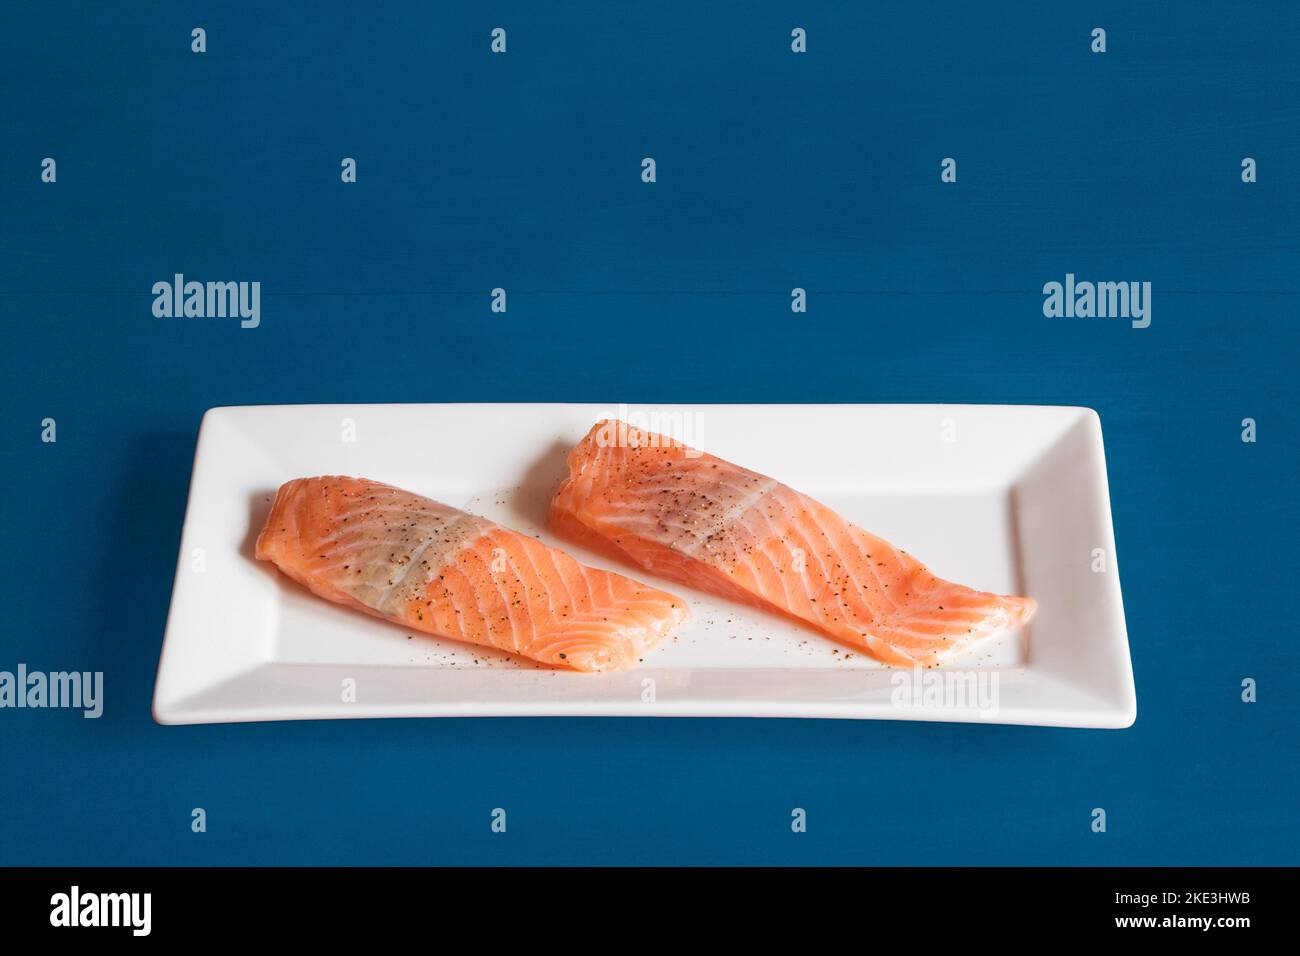 Two raw salmon loins seasoned with salt and pepper on a rectangular white ceramic platter on a blue studio background with copy space. Food and fish. Stock Photo